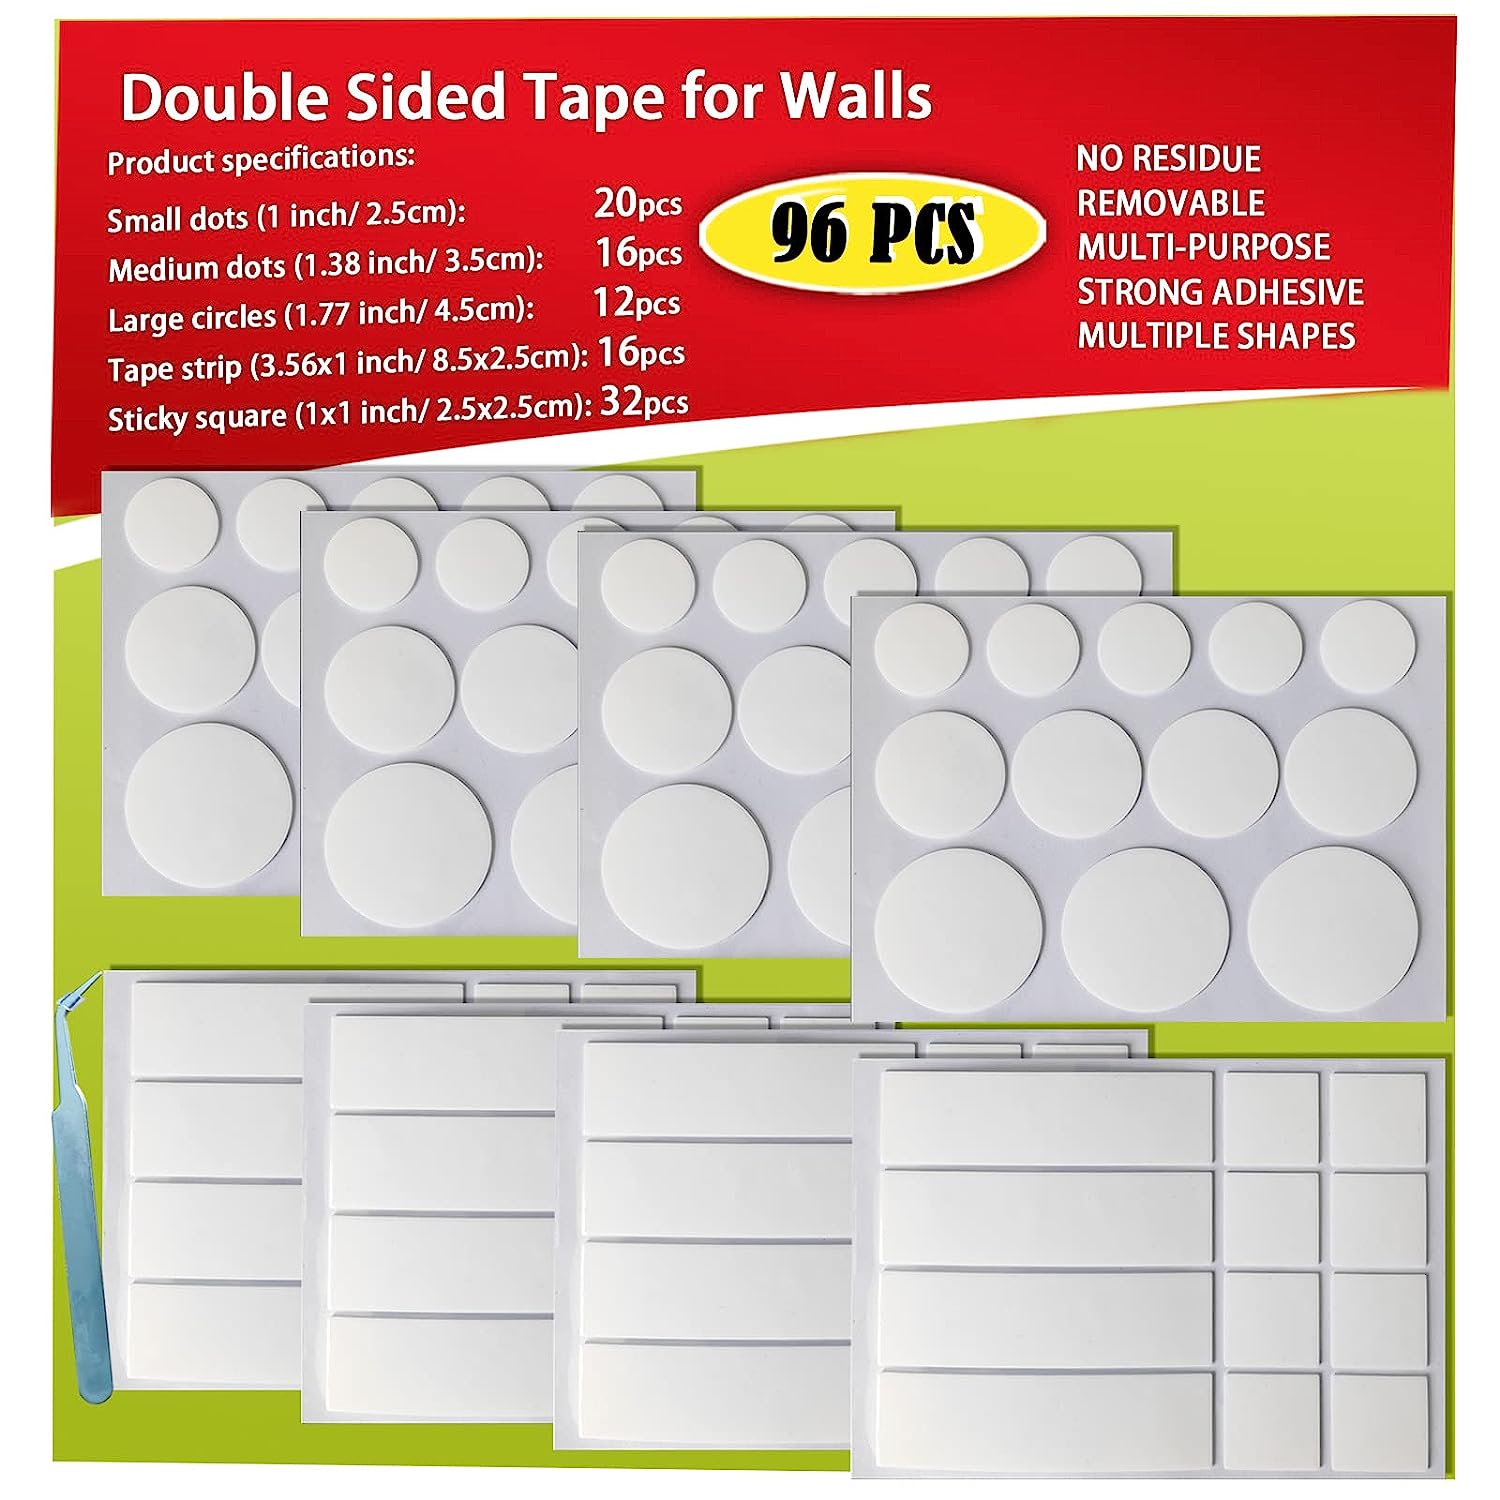 Birllaid Double Sided Tape for Walls, Picture Hanging [...]